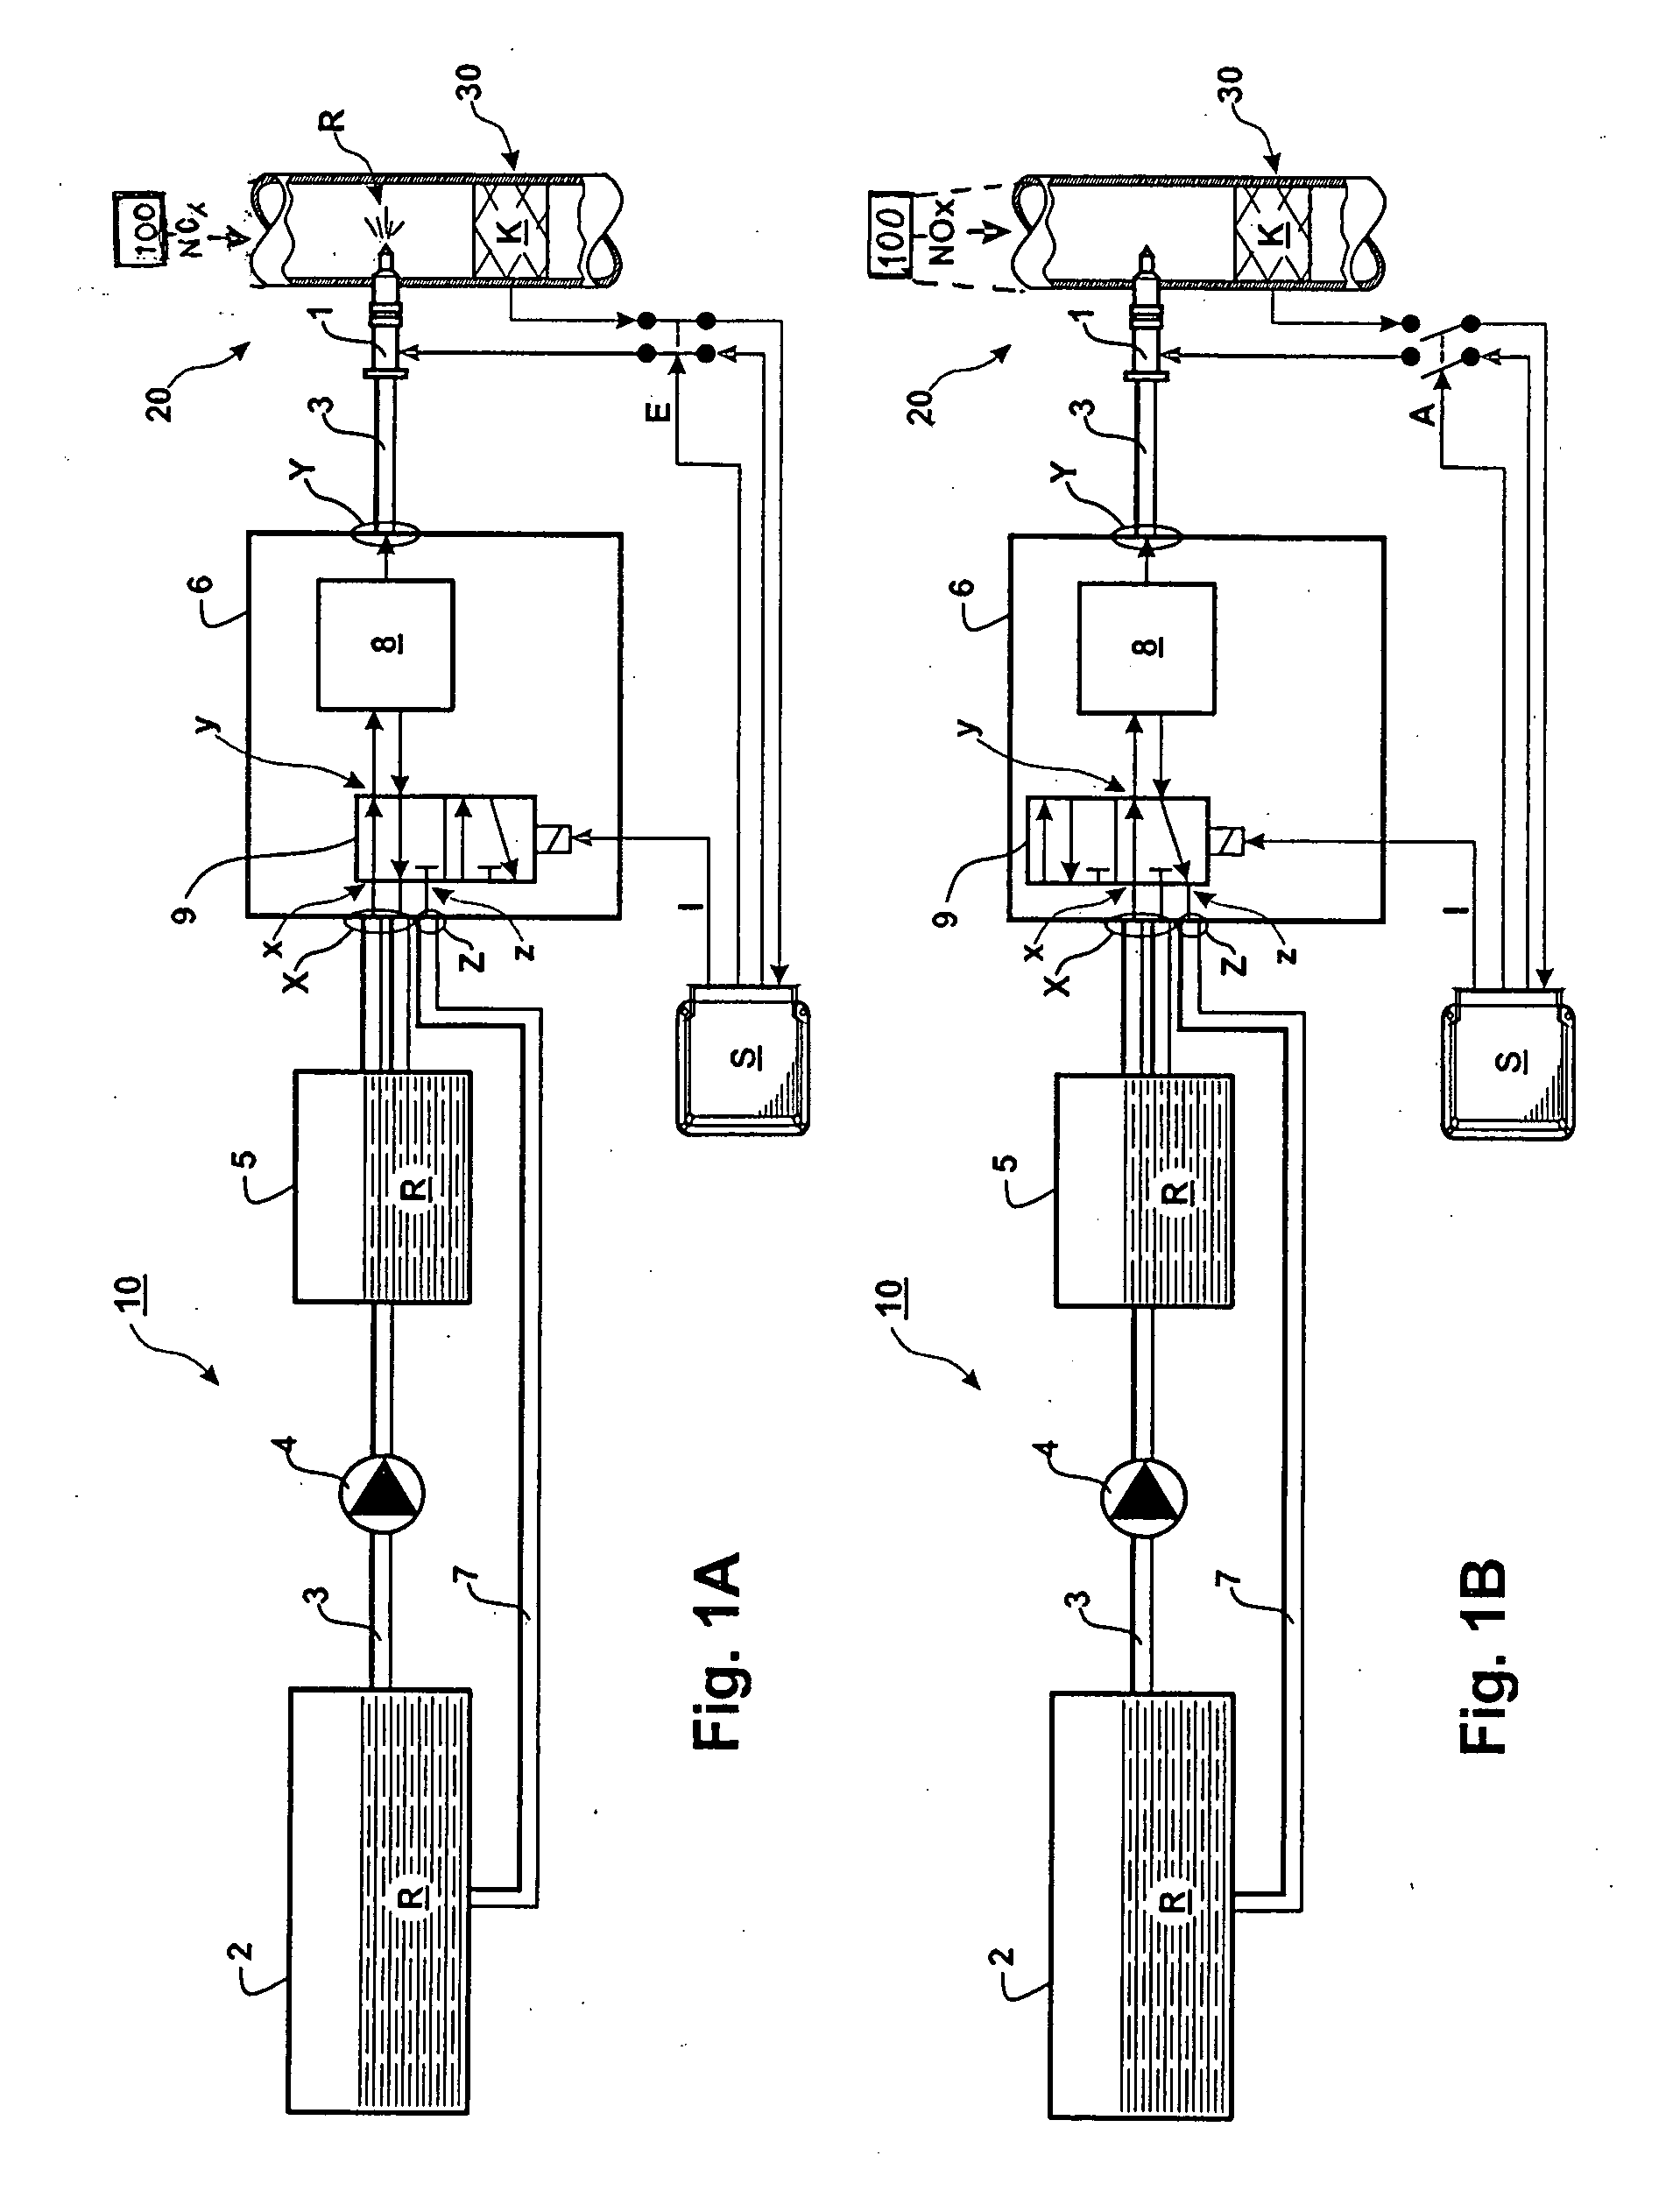 Supply arrangement for supplying an exhaust gas system with a solution including a reduction agent, an internal combustion engine, a generator uint and a method as well as a control arrangement therefor